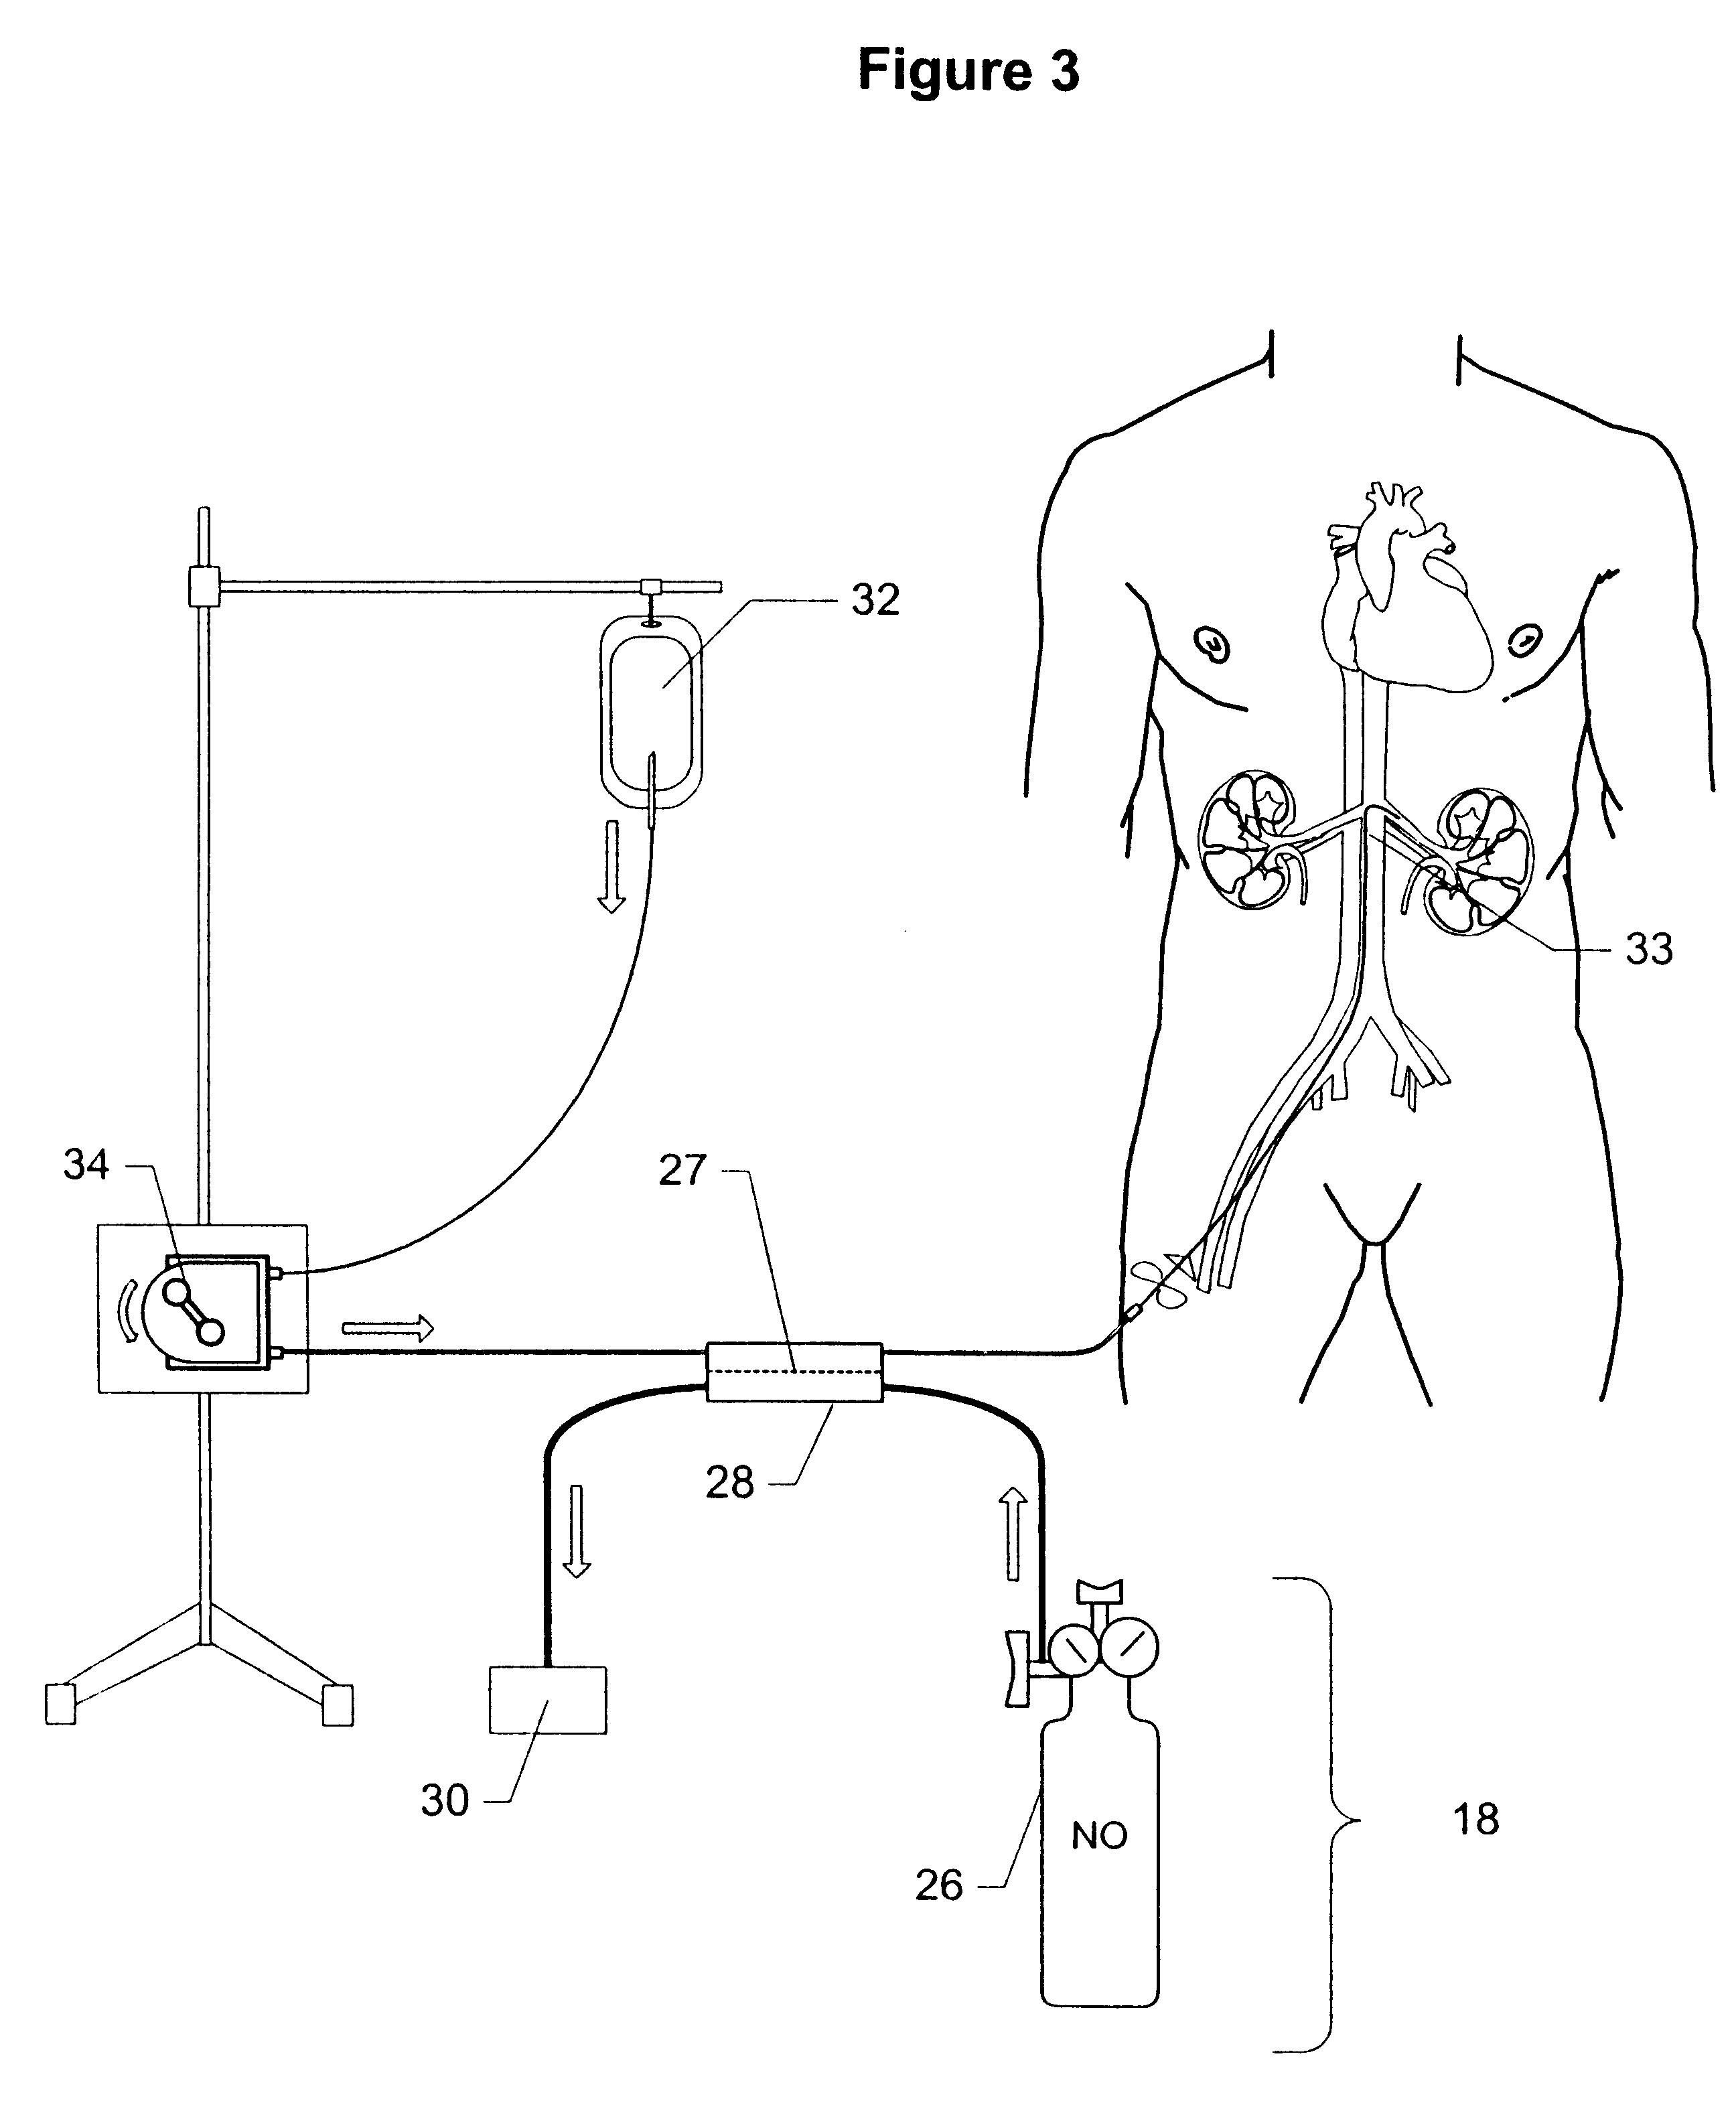 Method and apparatus for treatment of congestive heart failure by improving perfusion of the kidney by infusion of a vasodilator